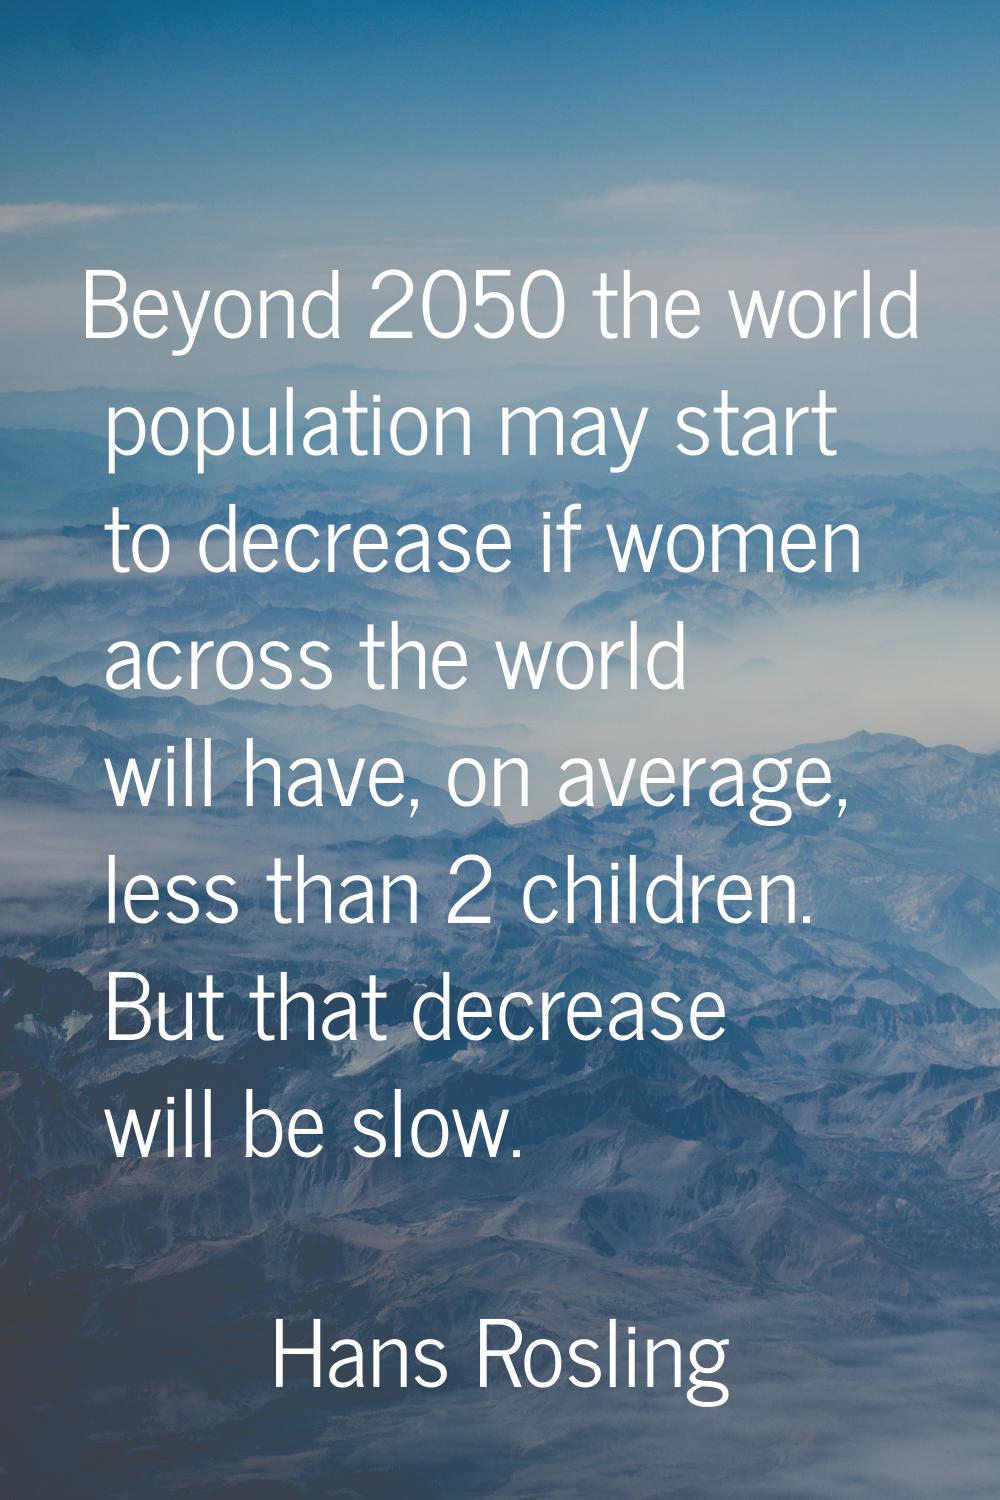 Beyond 2050 the world population may start to decrease if women across the world will have, on aver